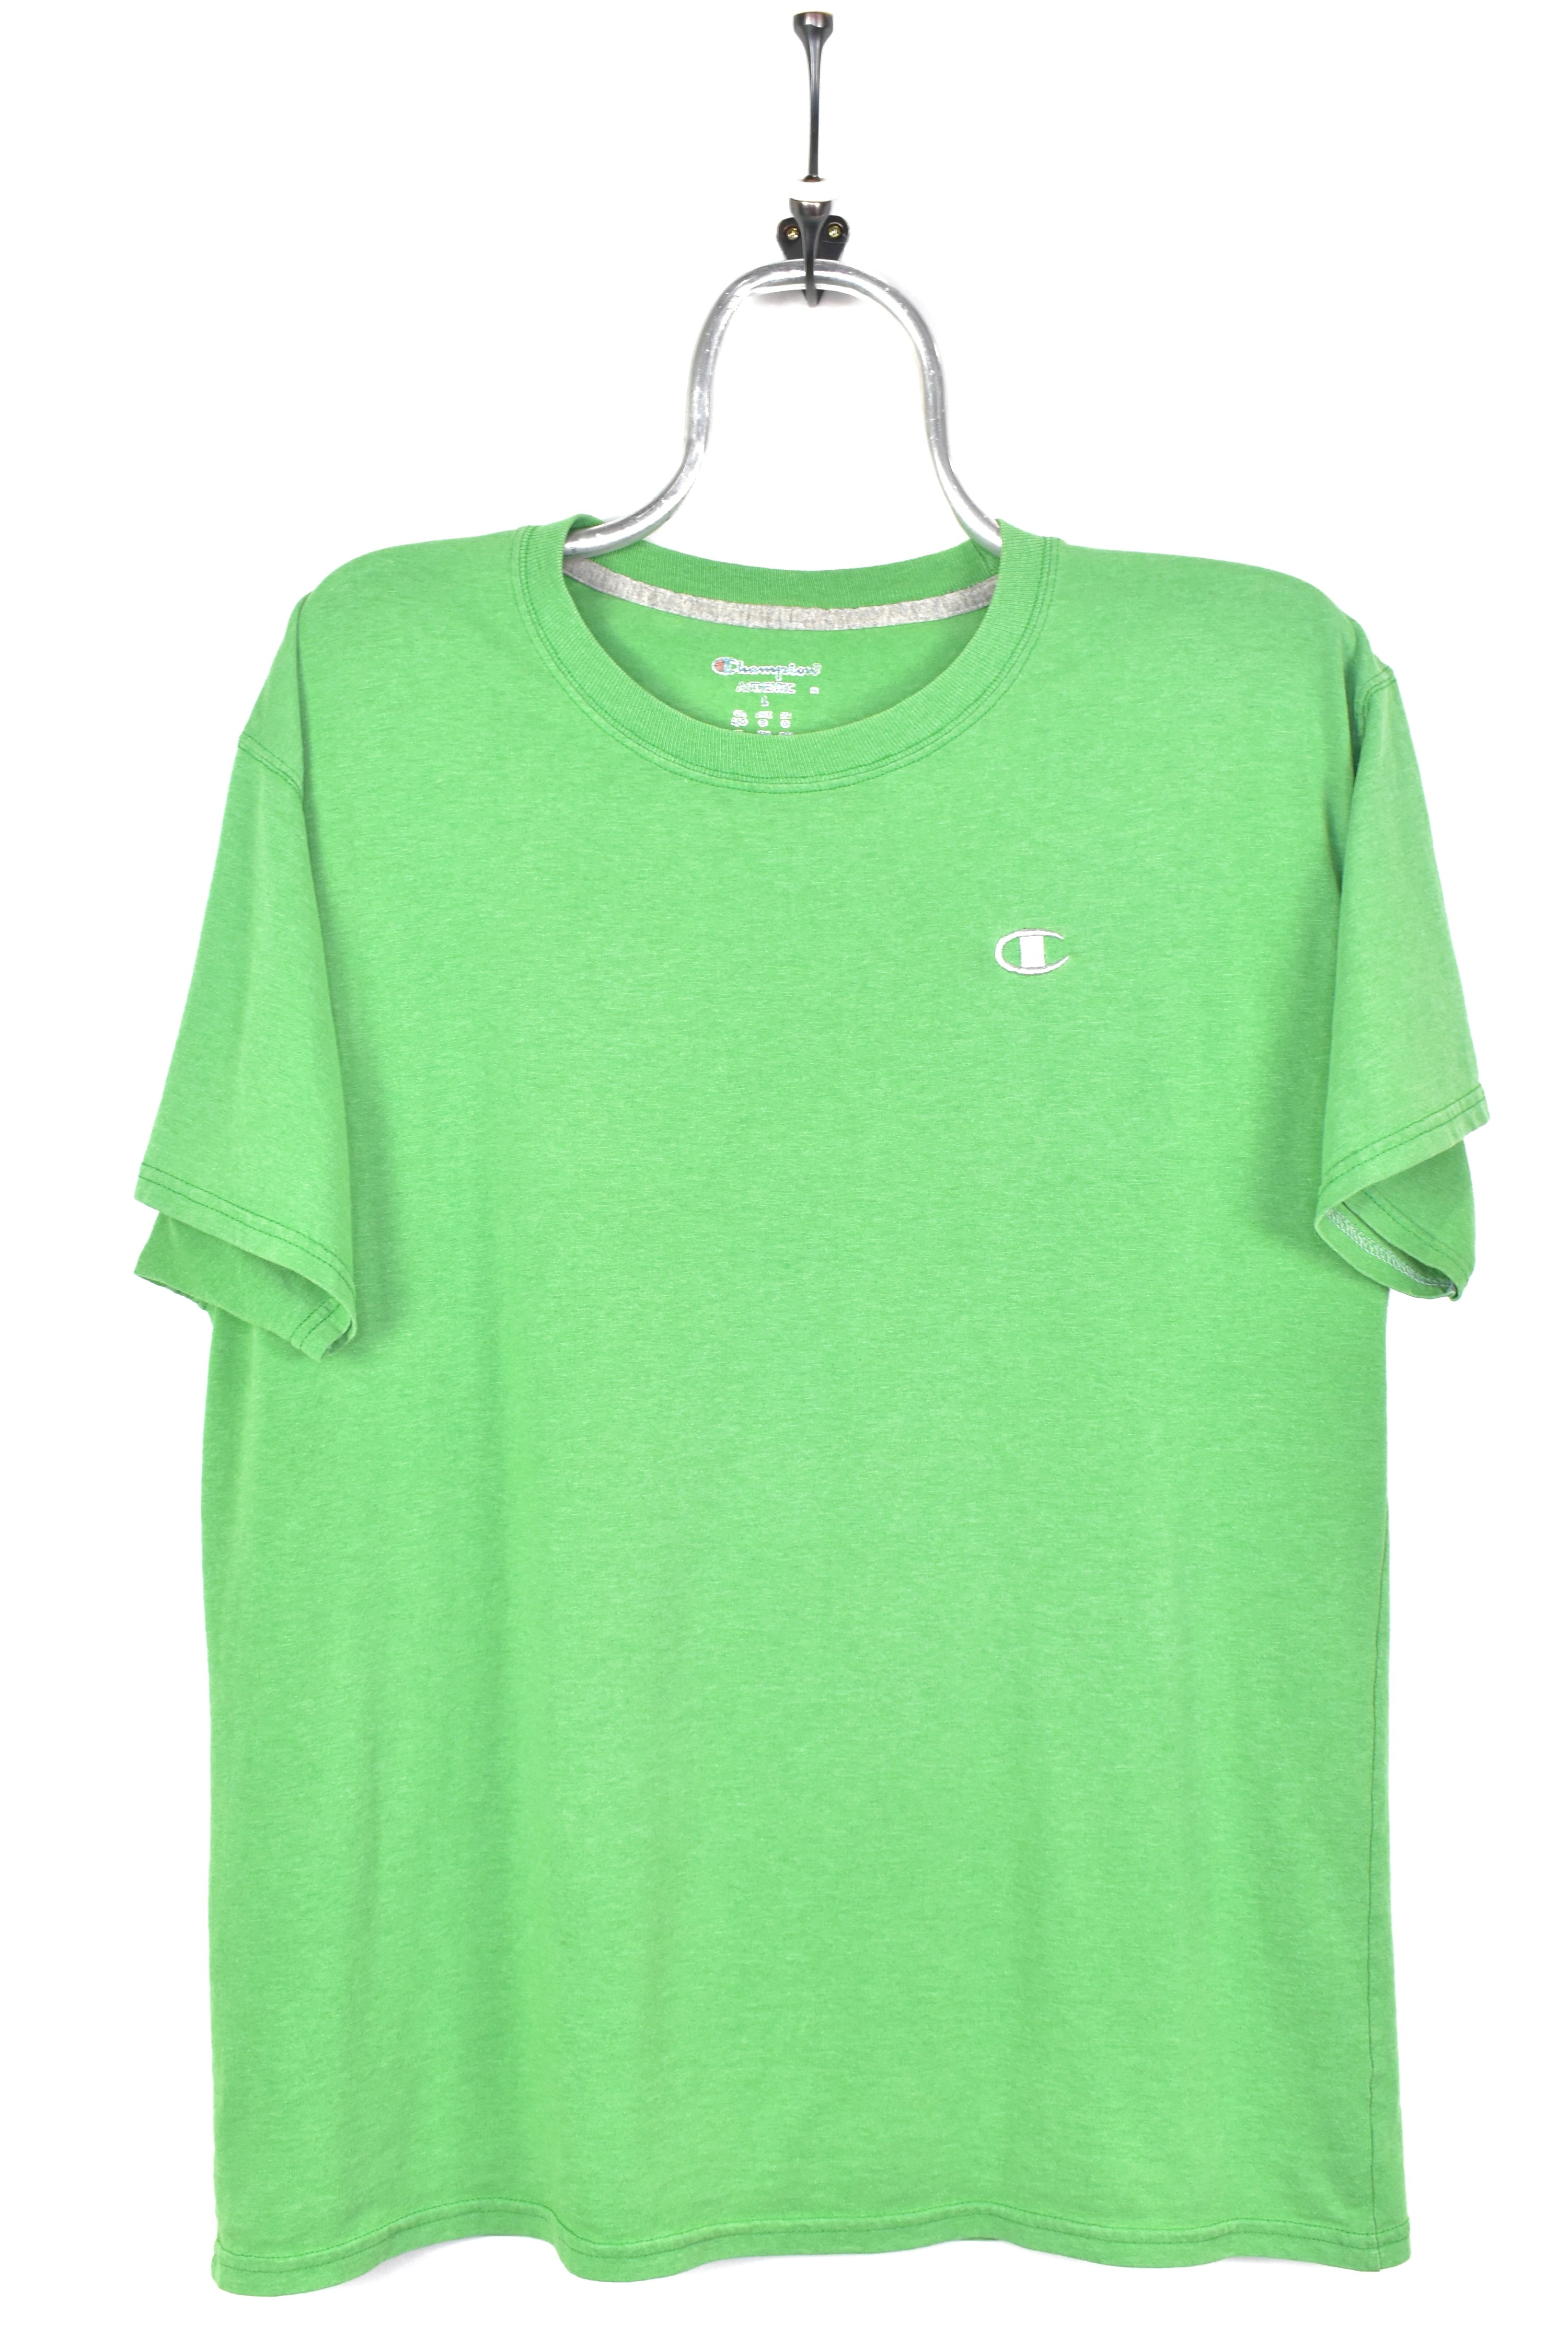 VINTAGE CHAMPION EMBROIDERED GREEN T-SHIRT | LARGE ADIDAS